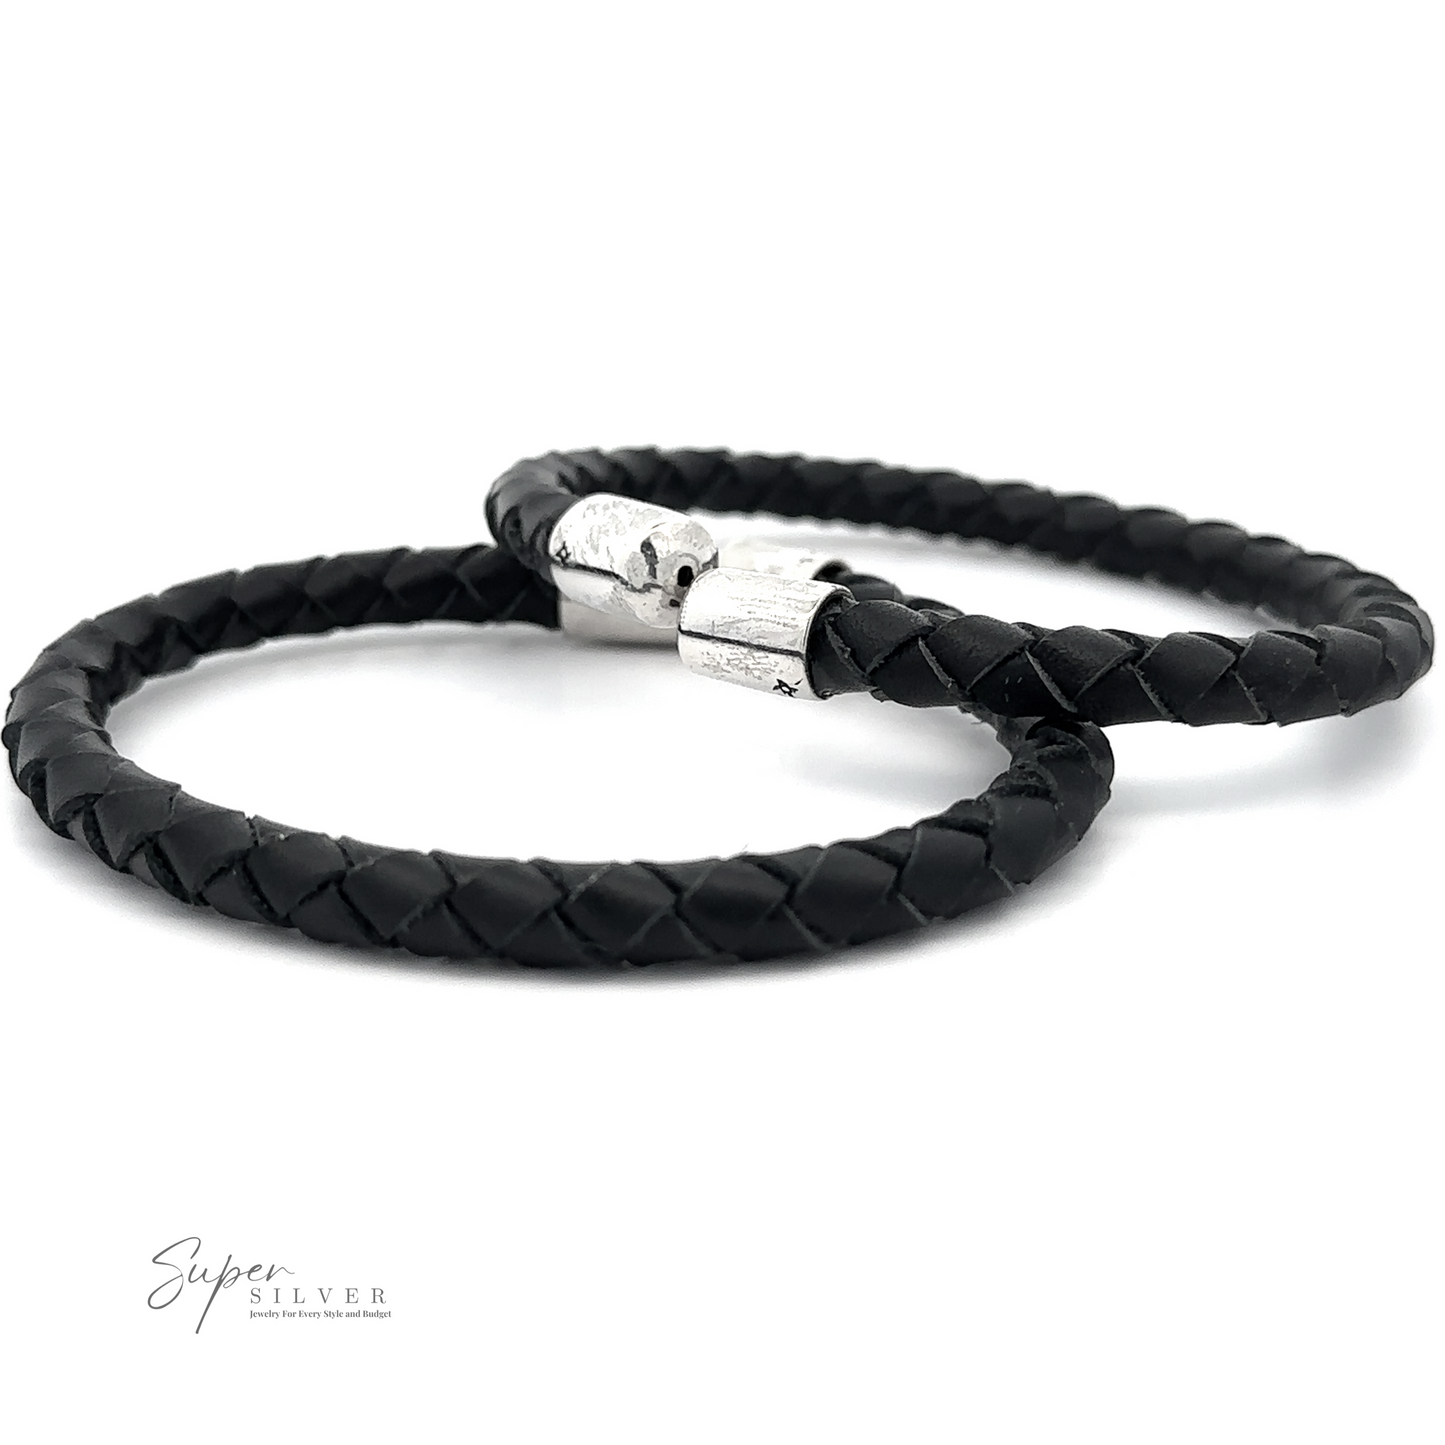 Two black Braided Leather Bracelets with sterling silver clasps are displayed. The bracelets are positioned overlapping each other on a white background. The logo "Super Silver" is visible in the bottom left corner, showcasing these stylish men's accessories.